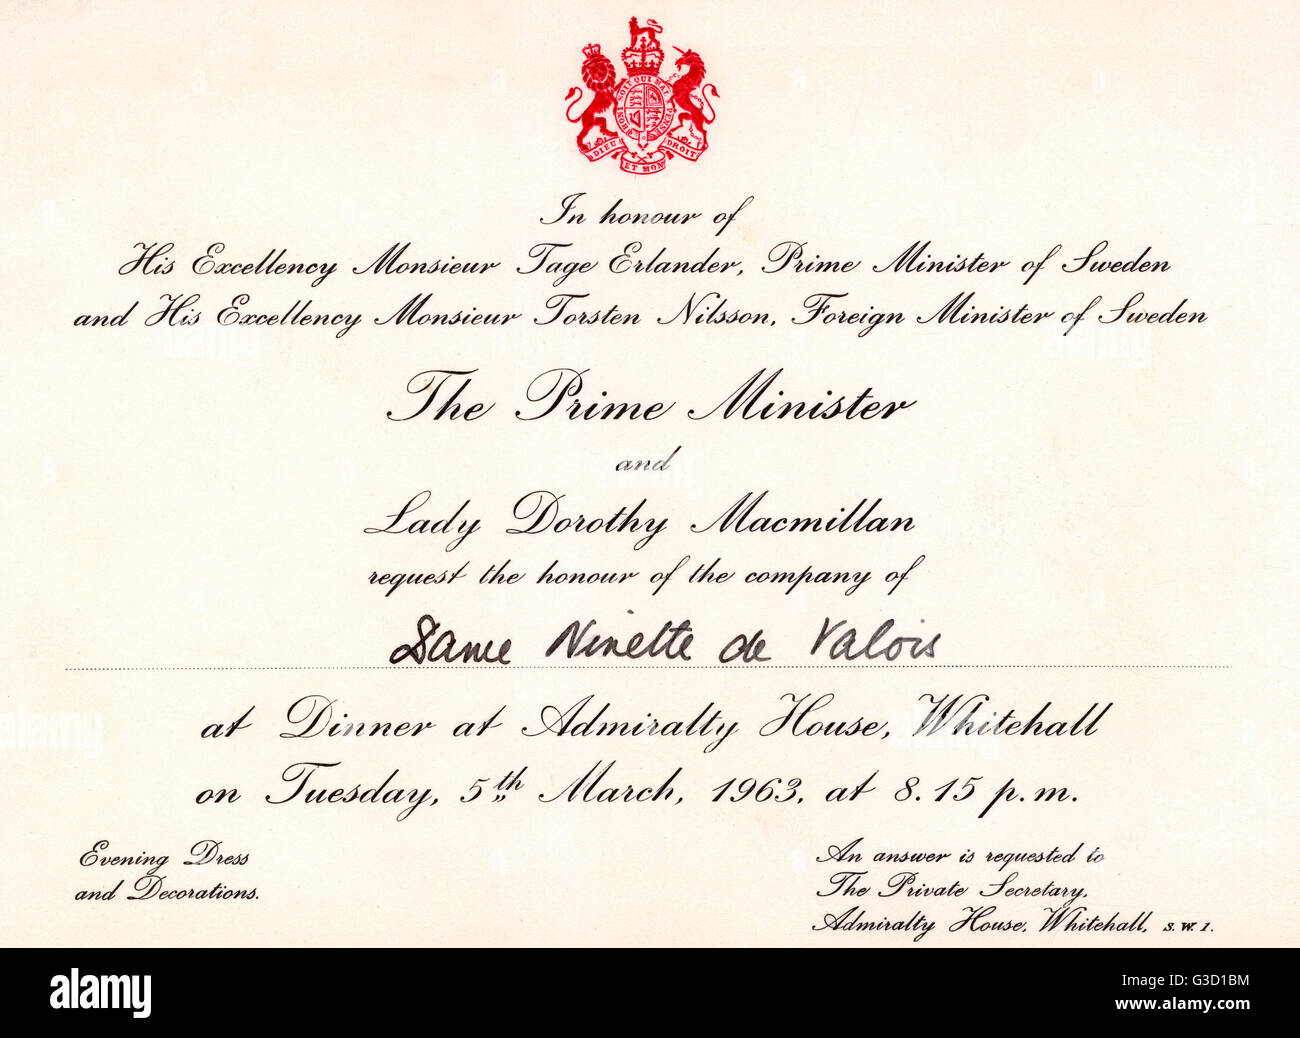 Invitation to a dinner in honour of His Excellency Monsieur Tage Erlander, Prime Minister of Sweden and His Excellency Monsieur Torsten Nilsson, Foreign Minister of Sweden from The Prime Minister Harold Macmillan and Lady Dorothy Macmillan to Dame Ninette Stock Photo